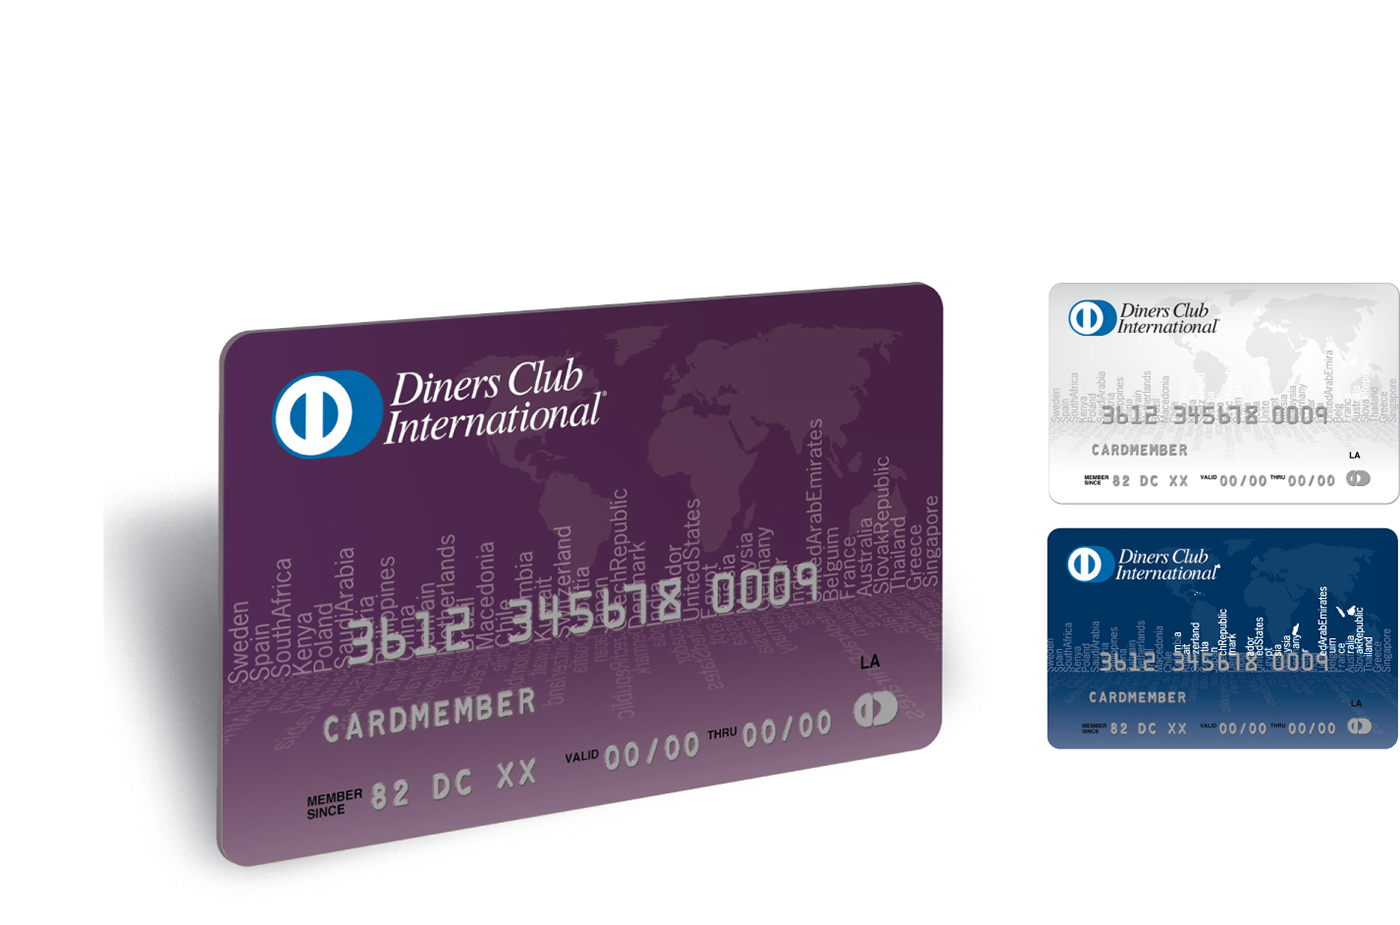 Expansion of Diners Club International credit card designs. 